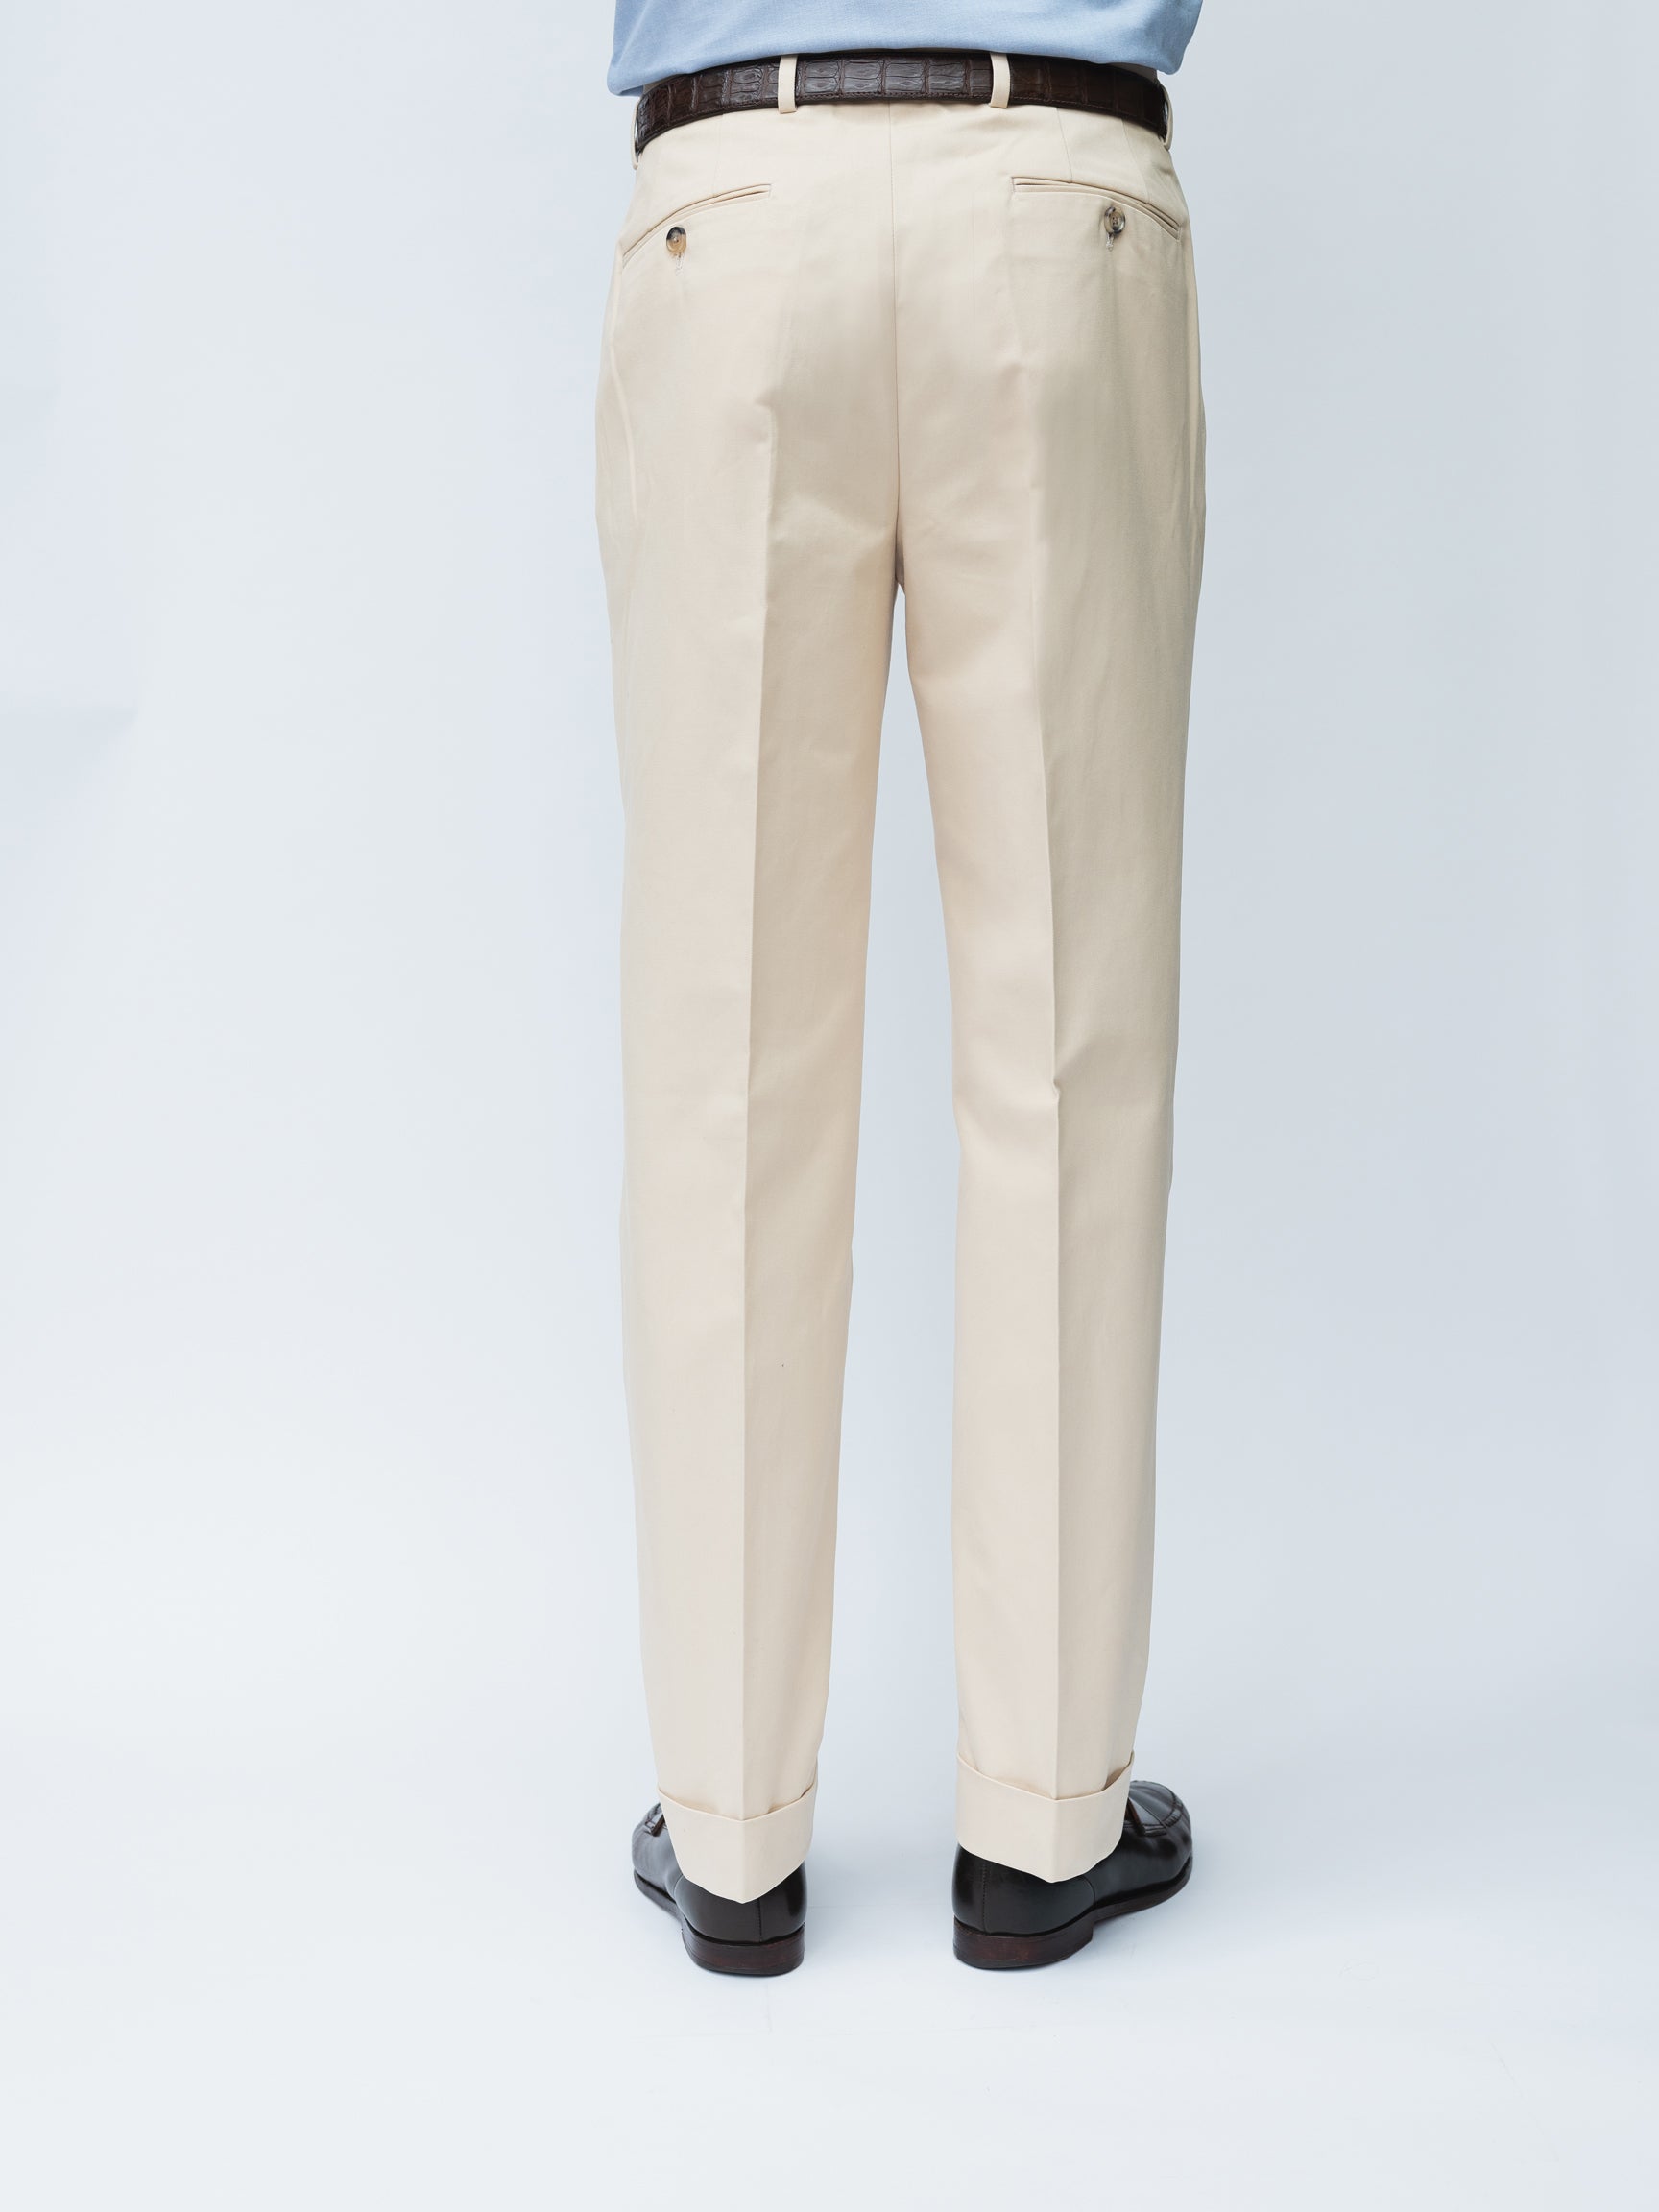 Buy L P Creation Regular Fit Cream Colour Cotton Pant (28) at Amazon.in